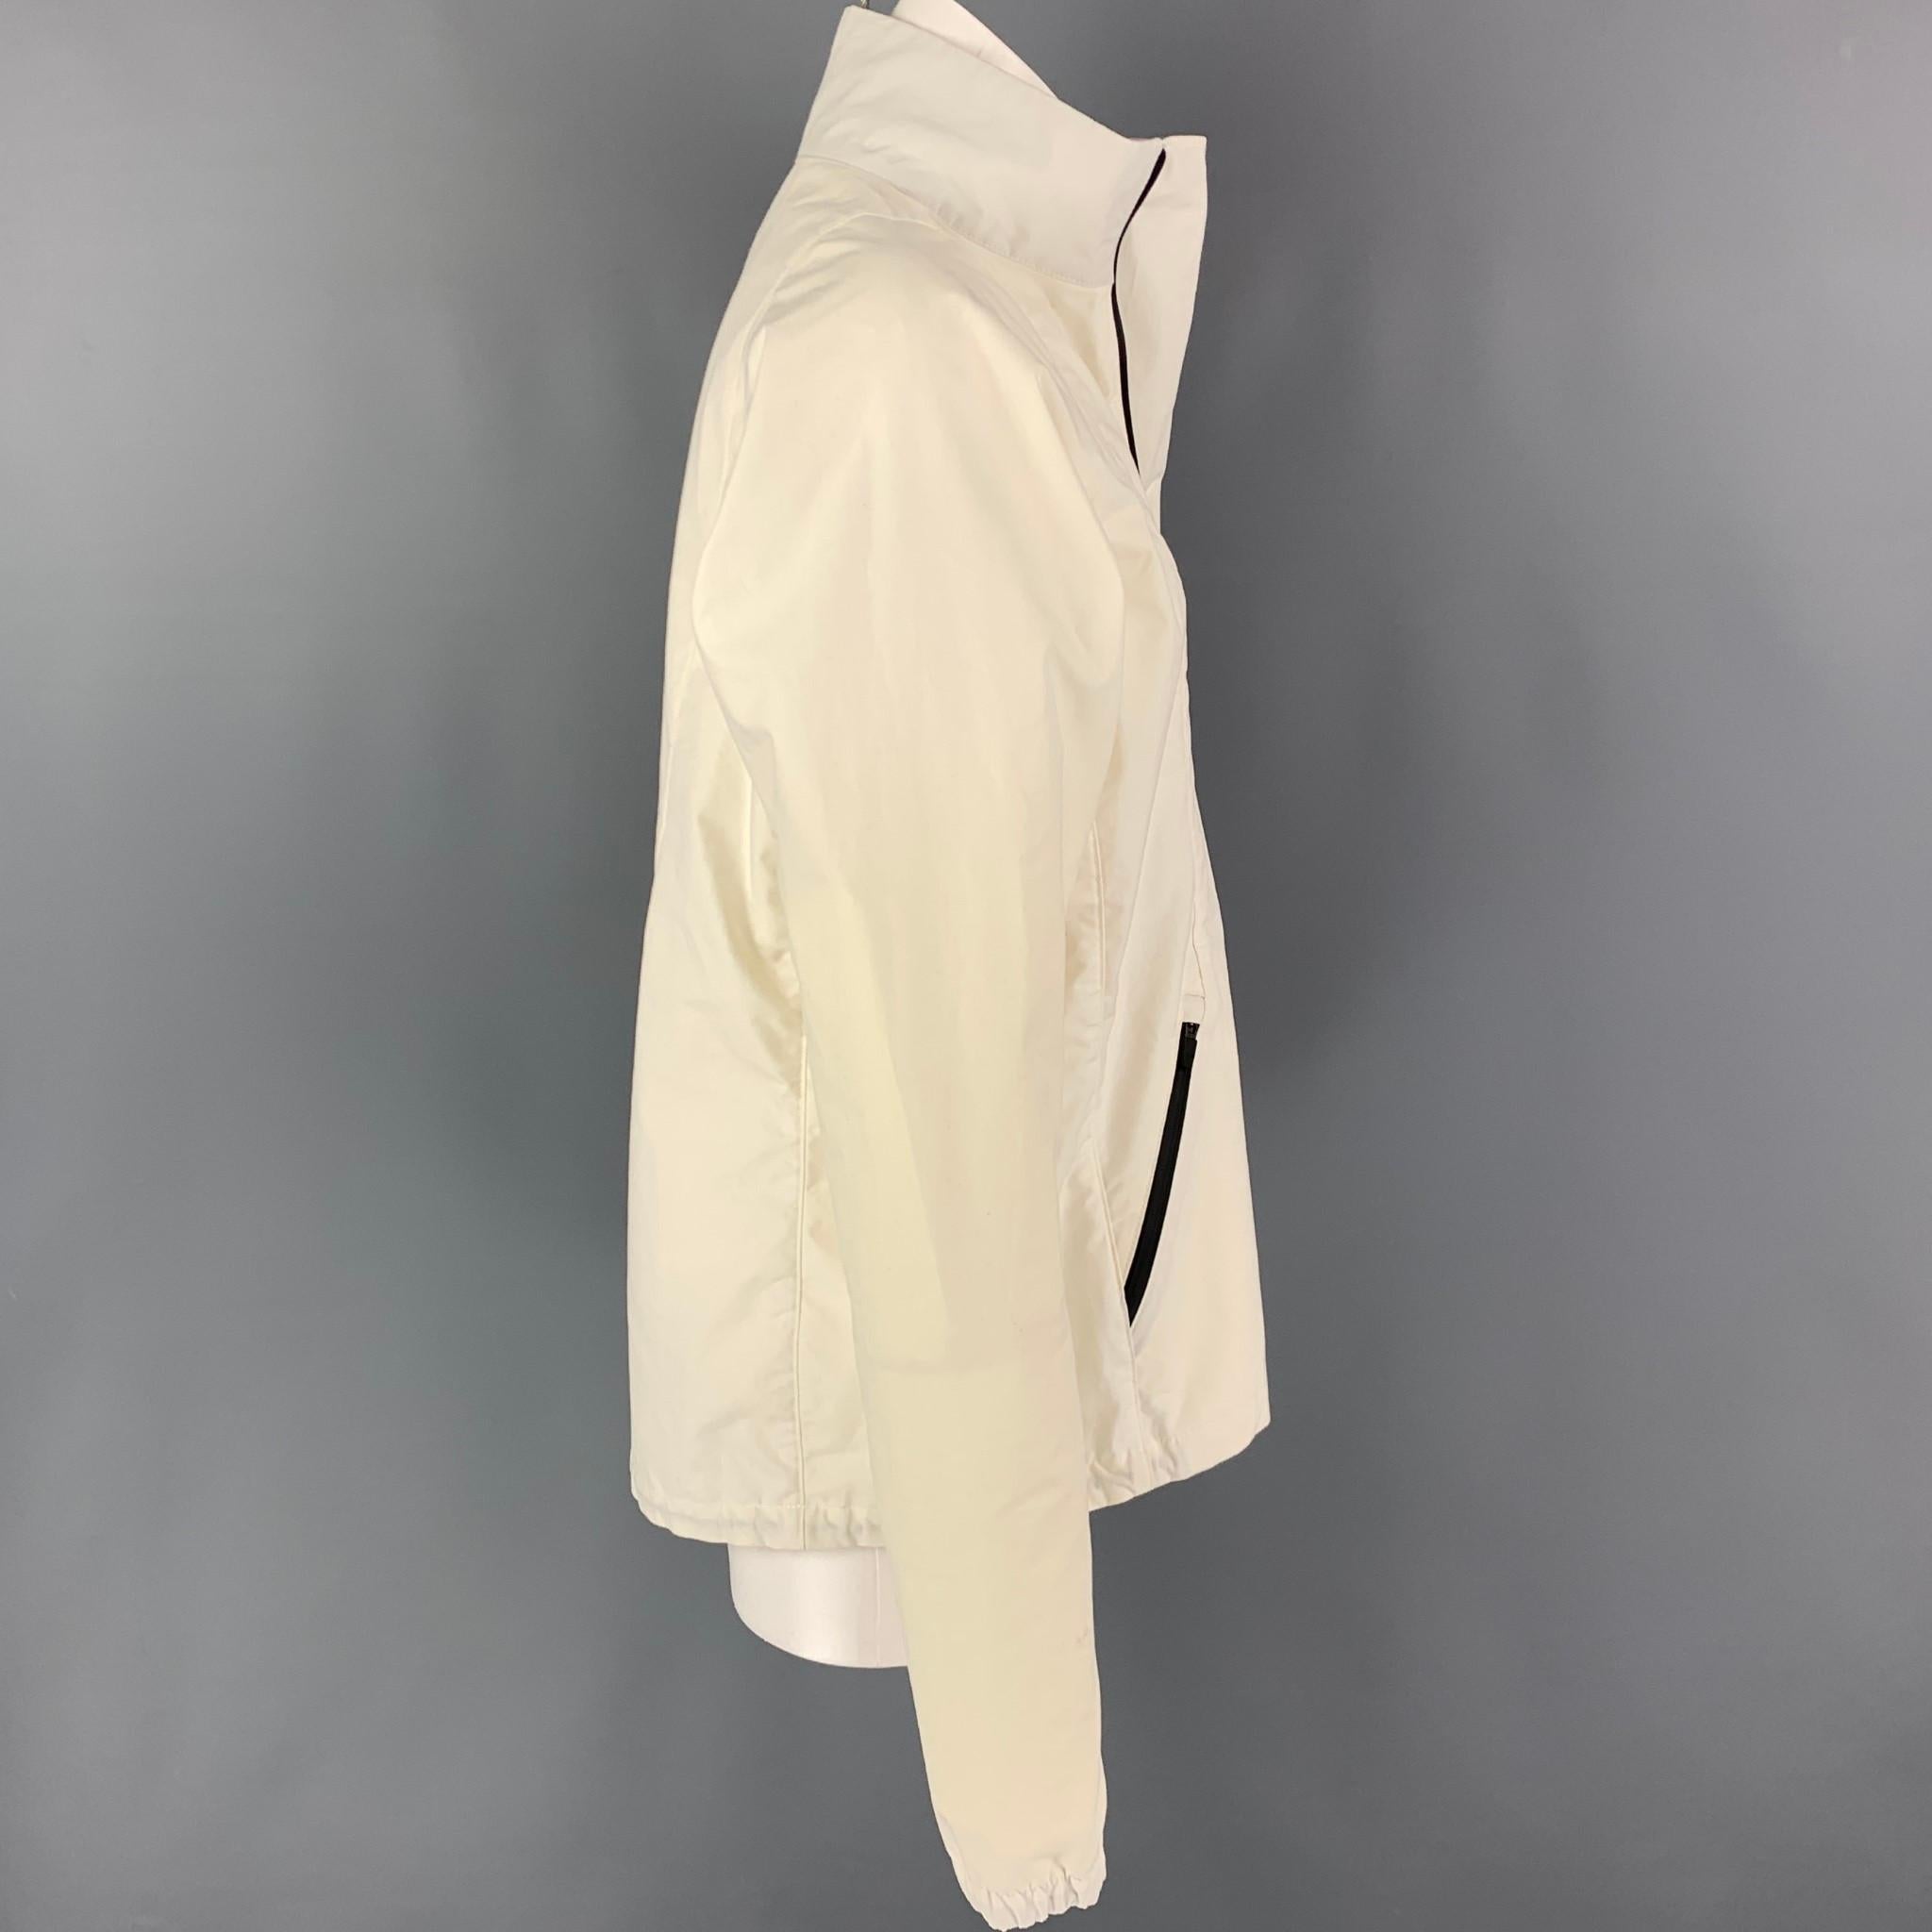 ENFIN LEVE jacket comes in a cream cotton featuring a water repellent design, high collar, black zippers, pocket zippers, and a half zip up closure. 

Very Good Pre-Owned Condition.
Marked: M
Original Retail Price: $740.00

Measurements:

Shoulder: